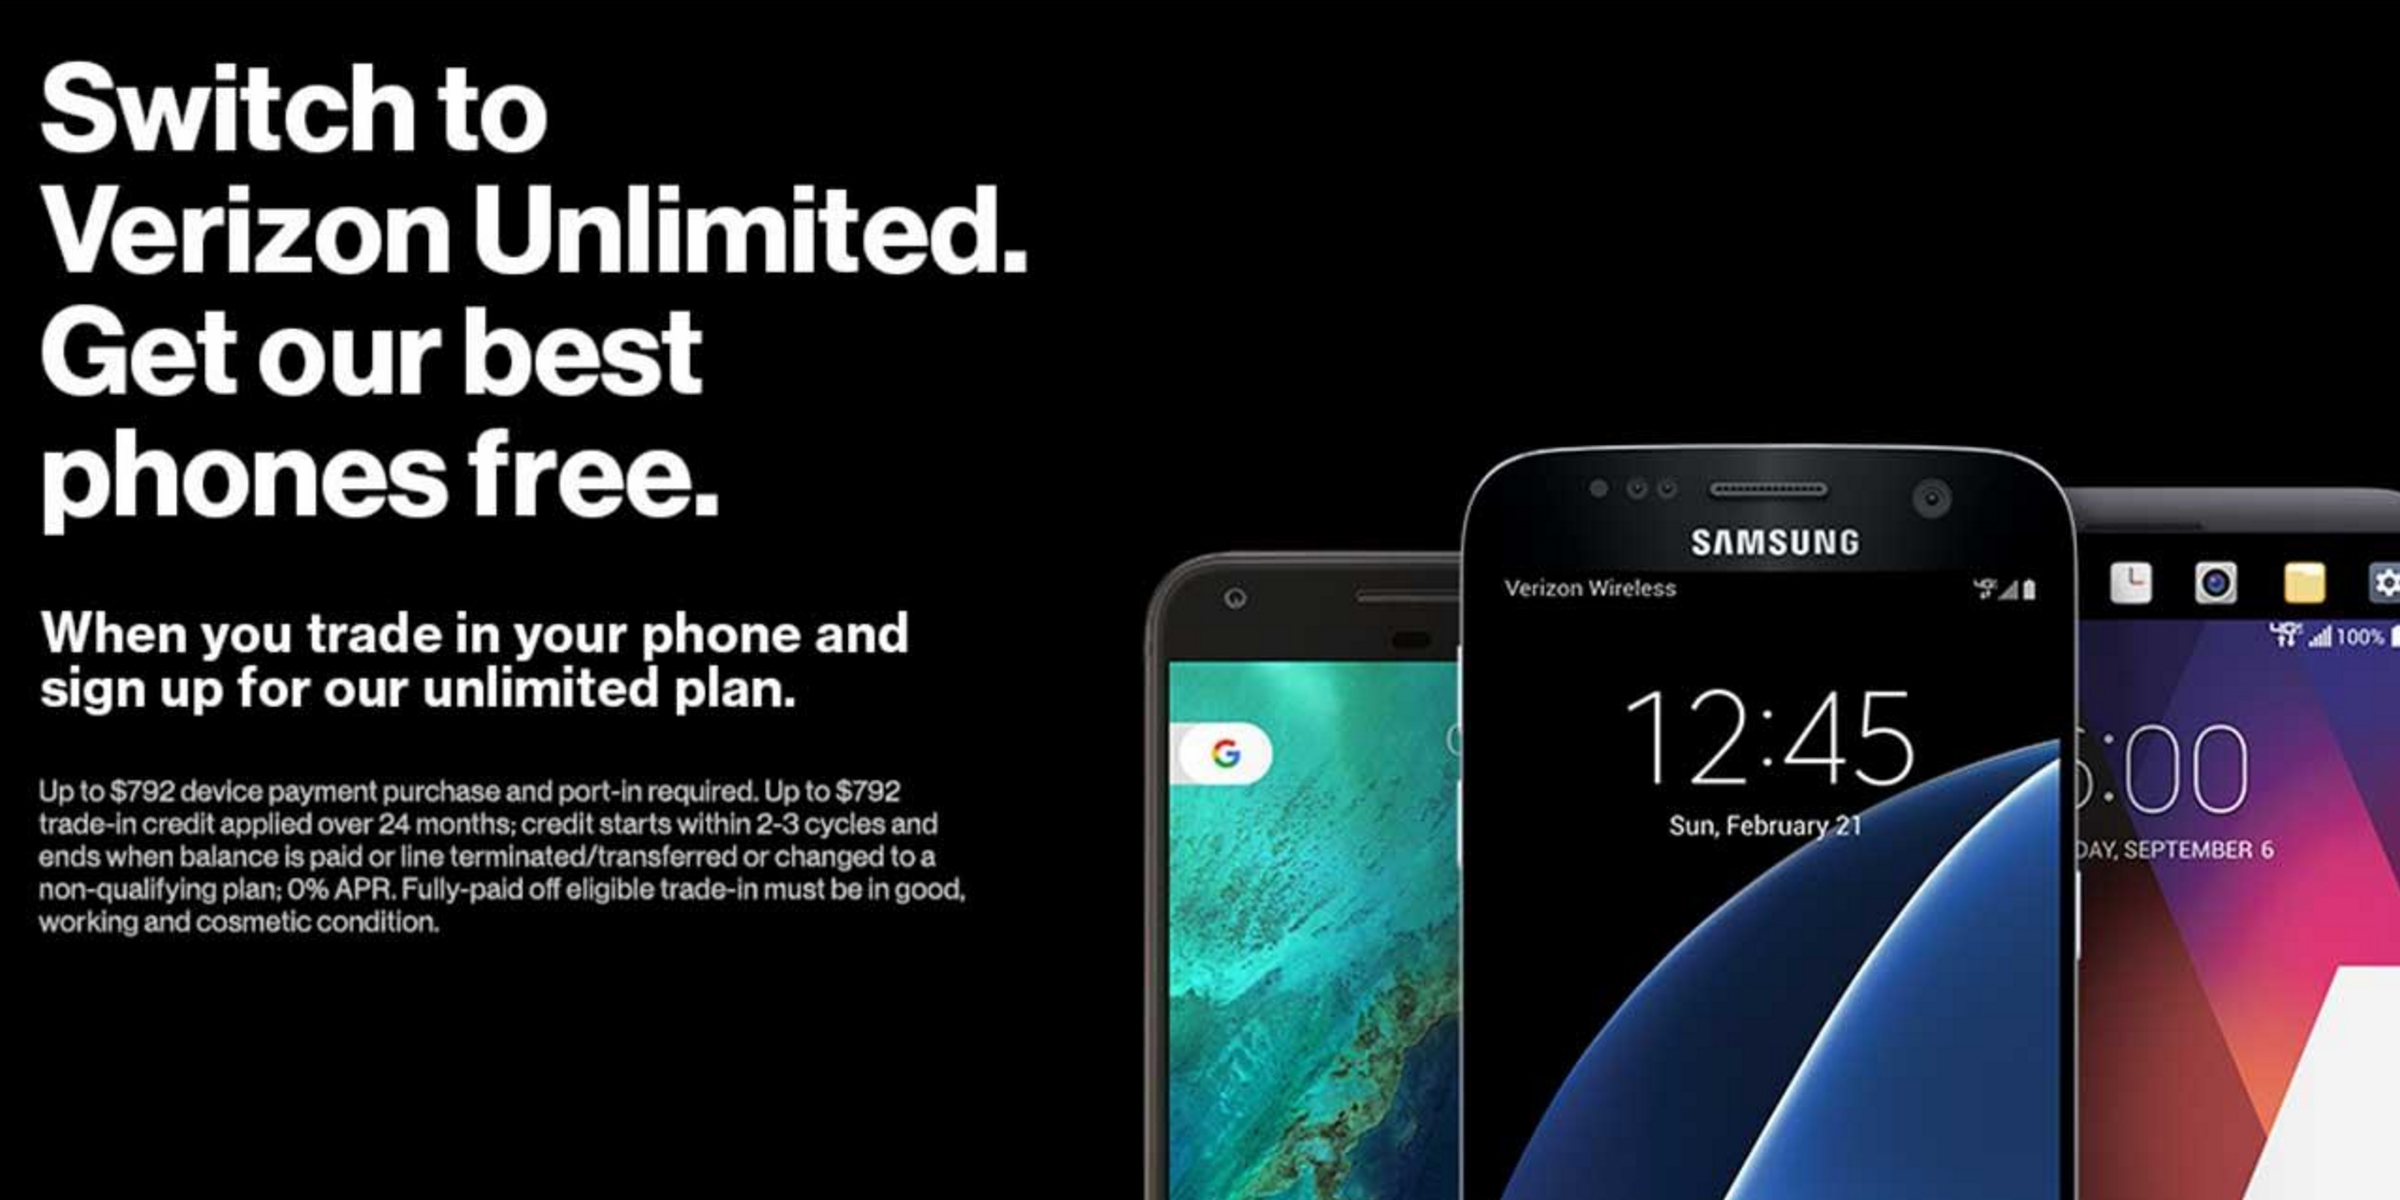 verizon-announces-trade-in-program-that-nets-a-free-iphone-7-plus-or